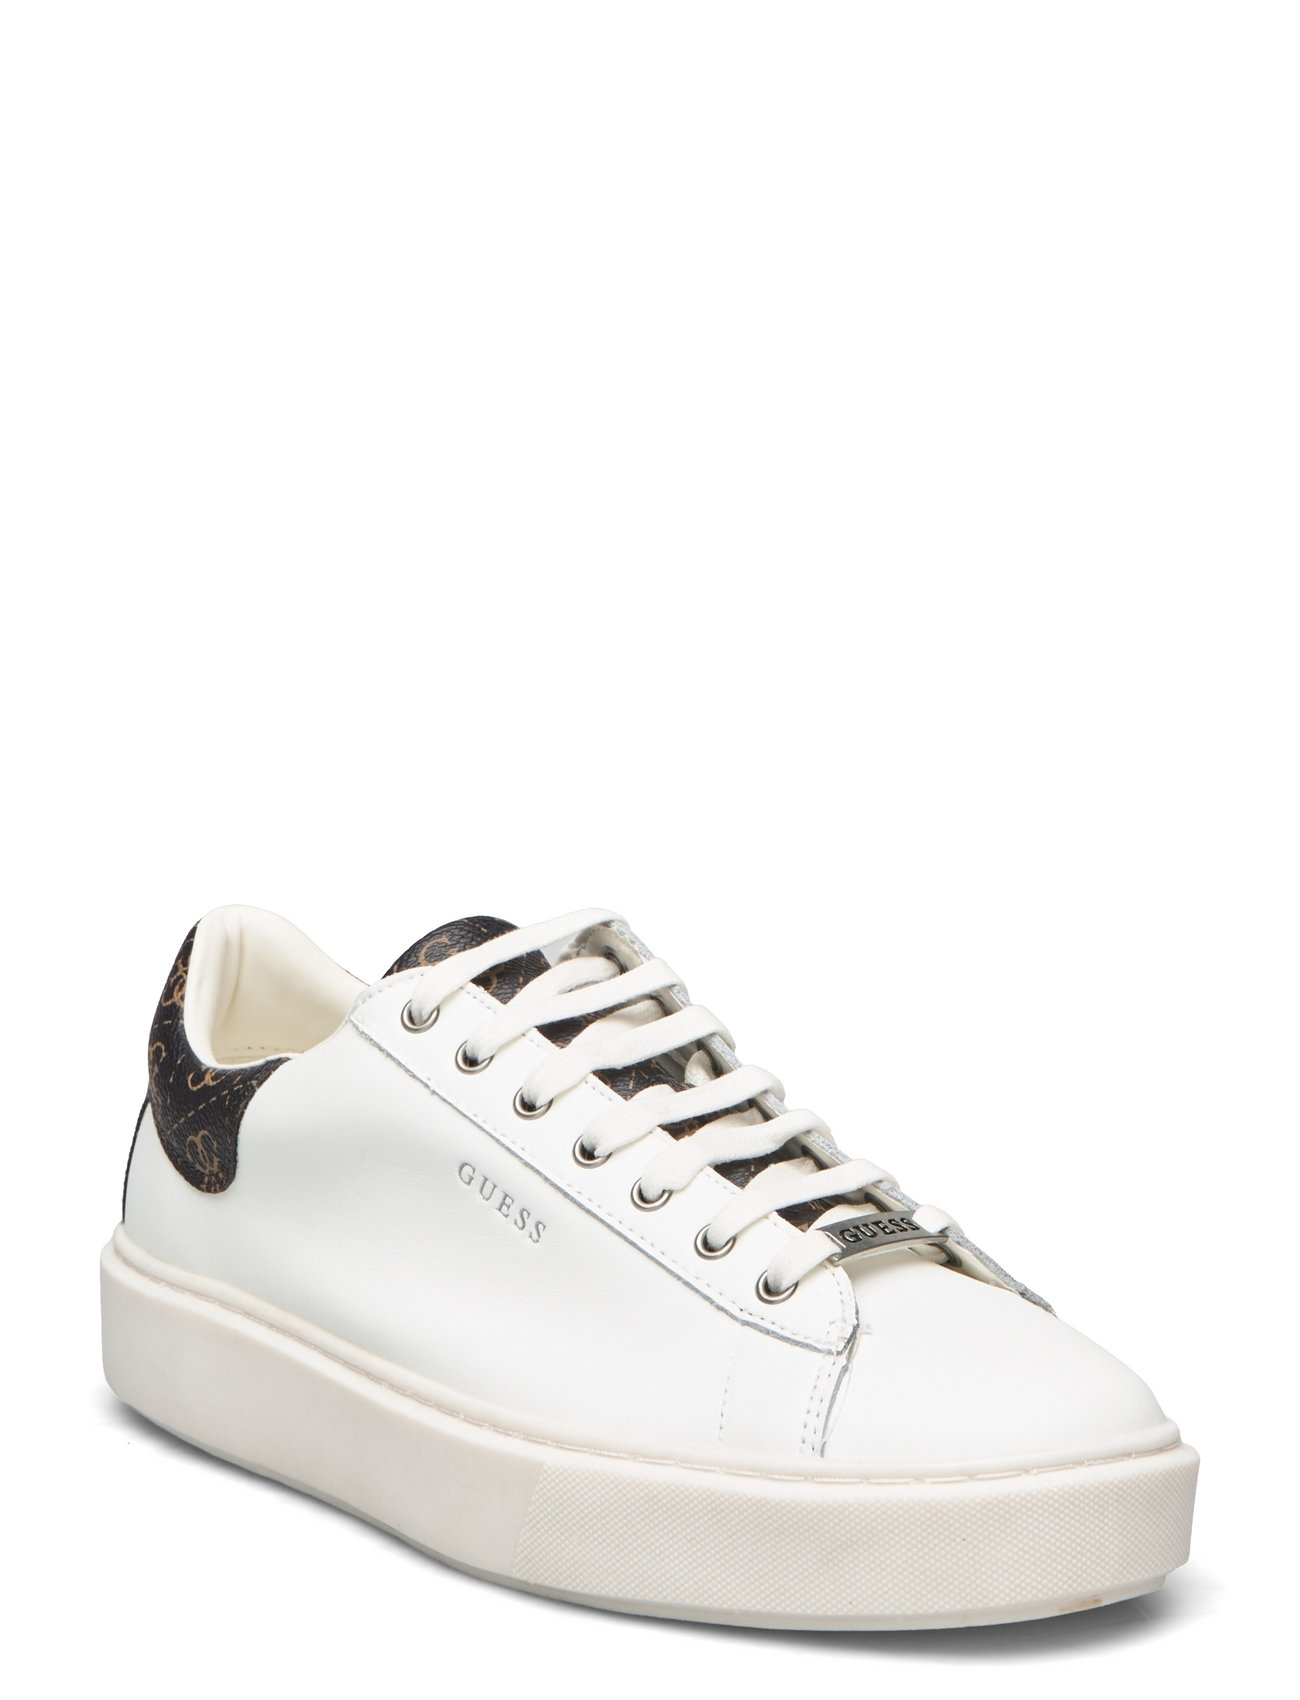 GUESS - sneakers - Boozt.com